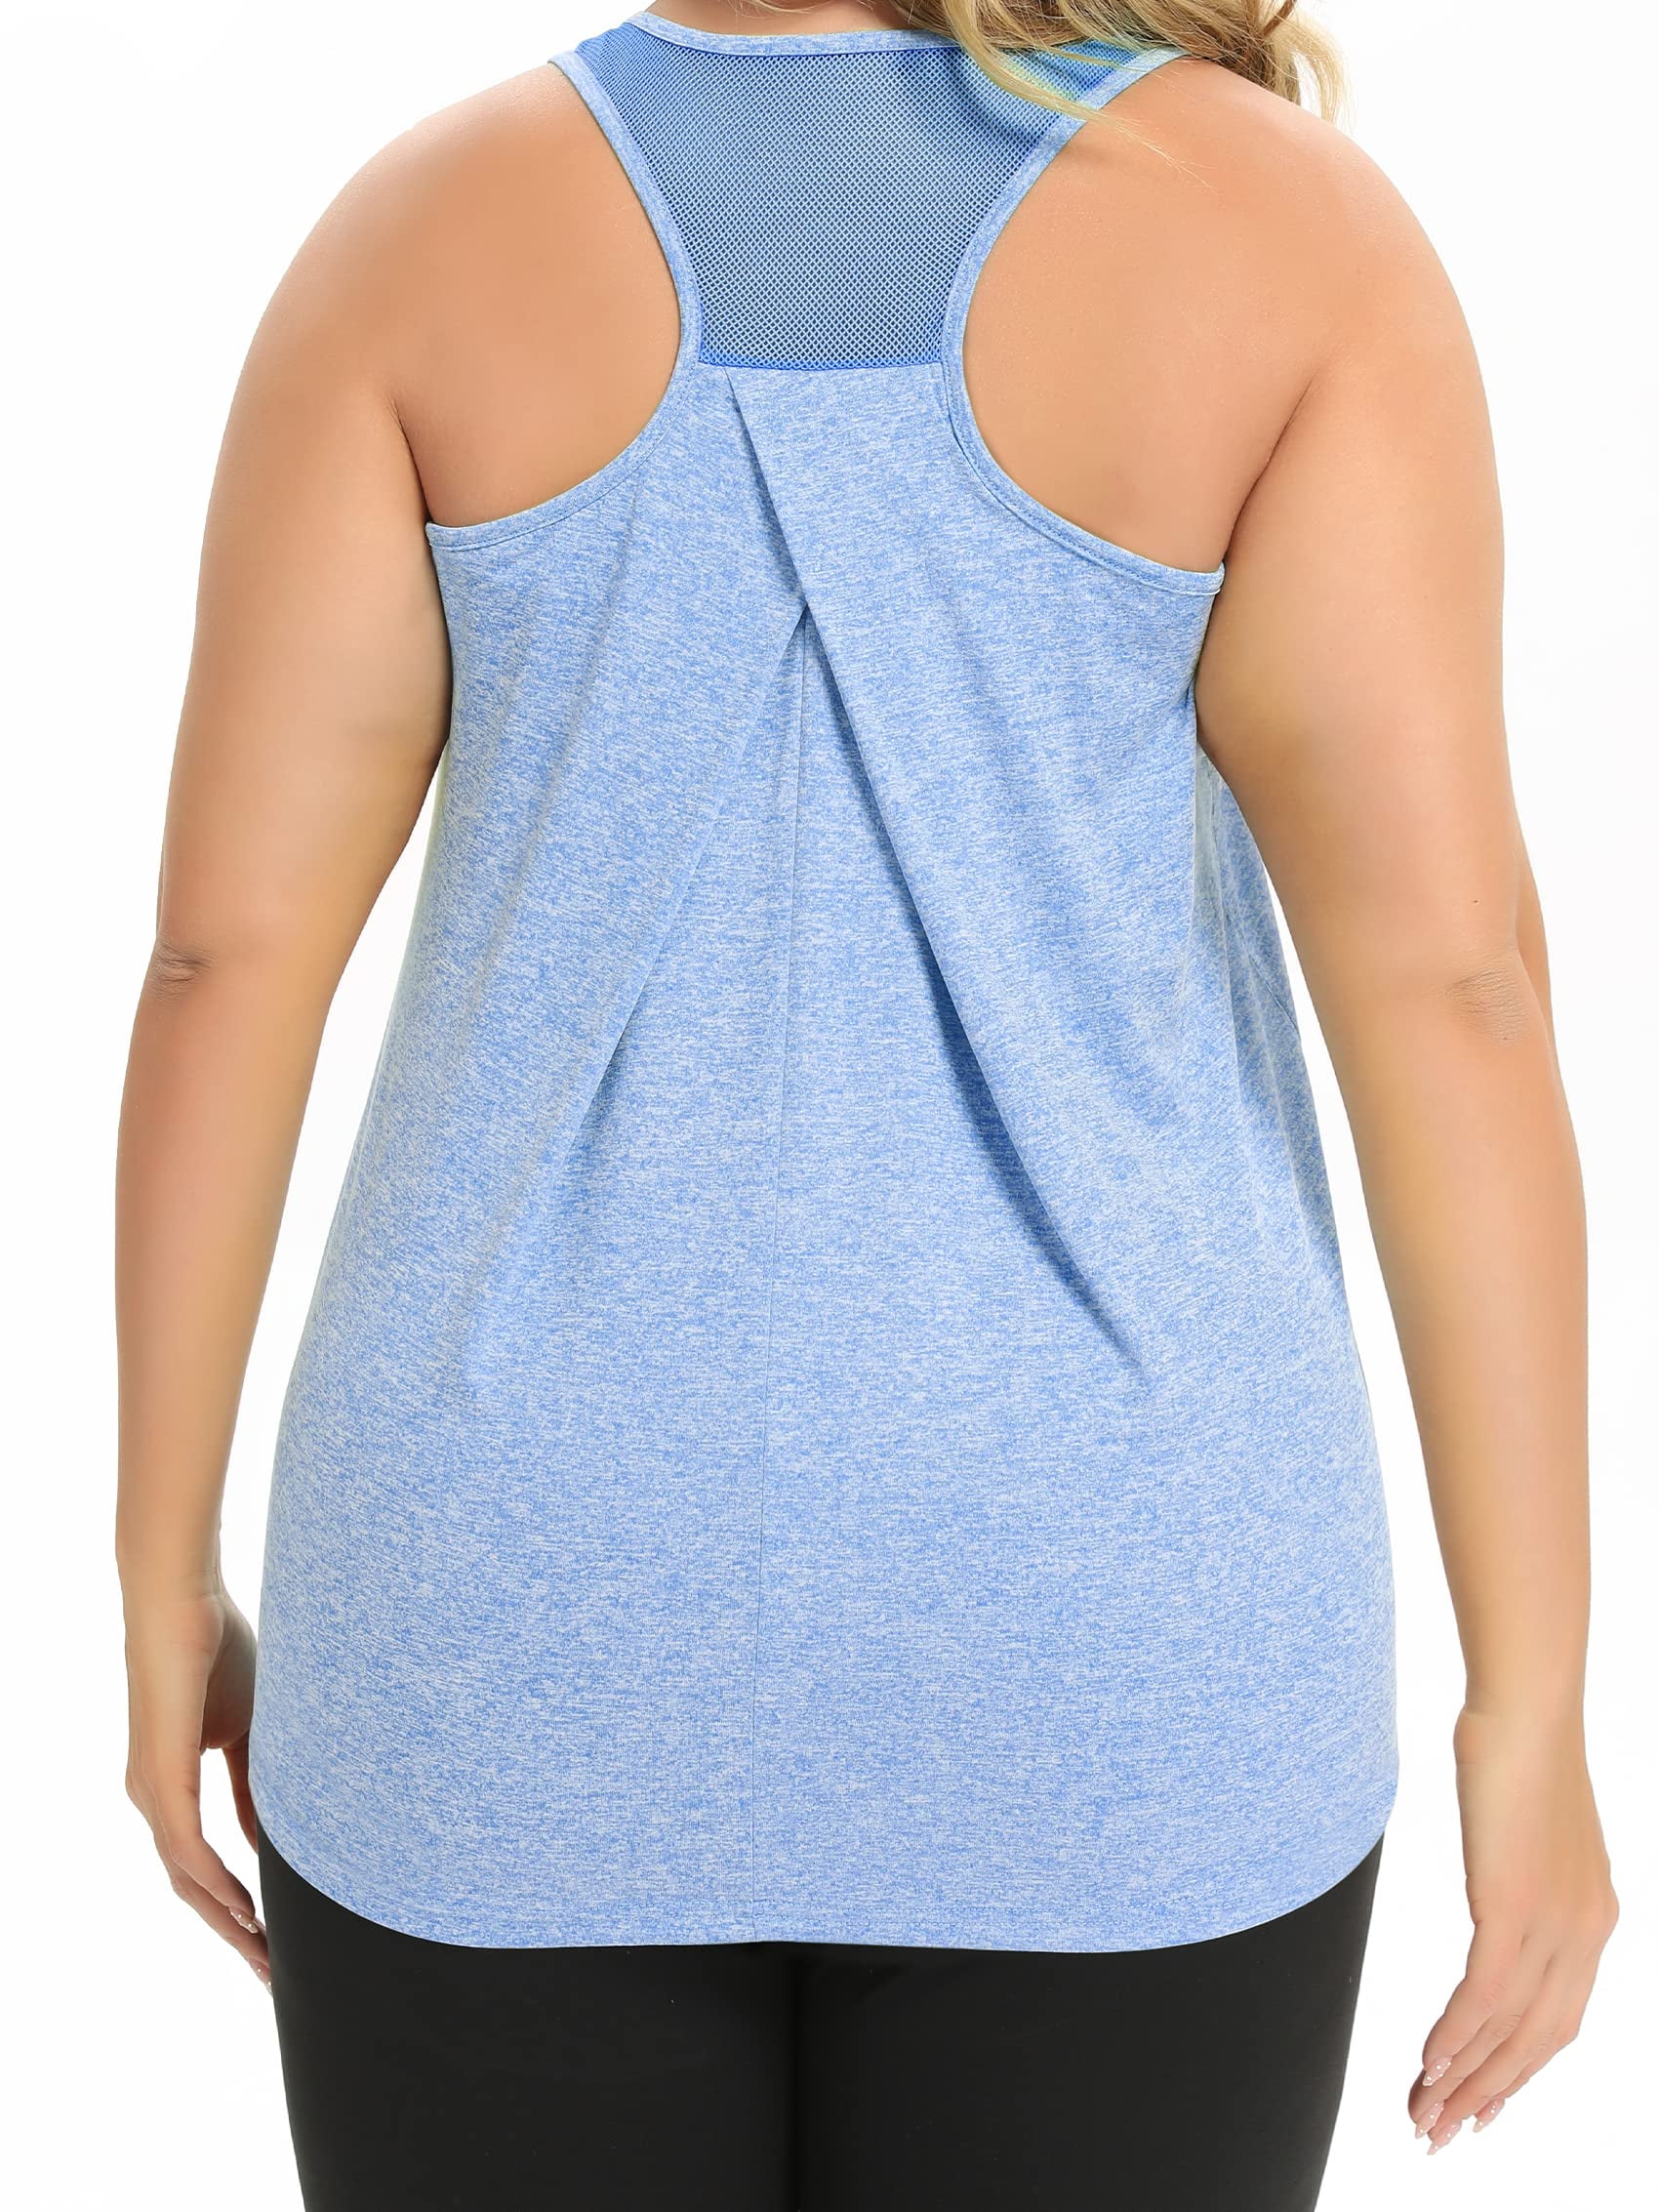 TIYOMI Ladies Plus Size 4X Tank Tops Blue Athletic Shirts Yoga Racerback  Tops Quick Dry Shirts Summer Tee for Gym Exercise 4XL 24W 26W 